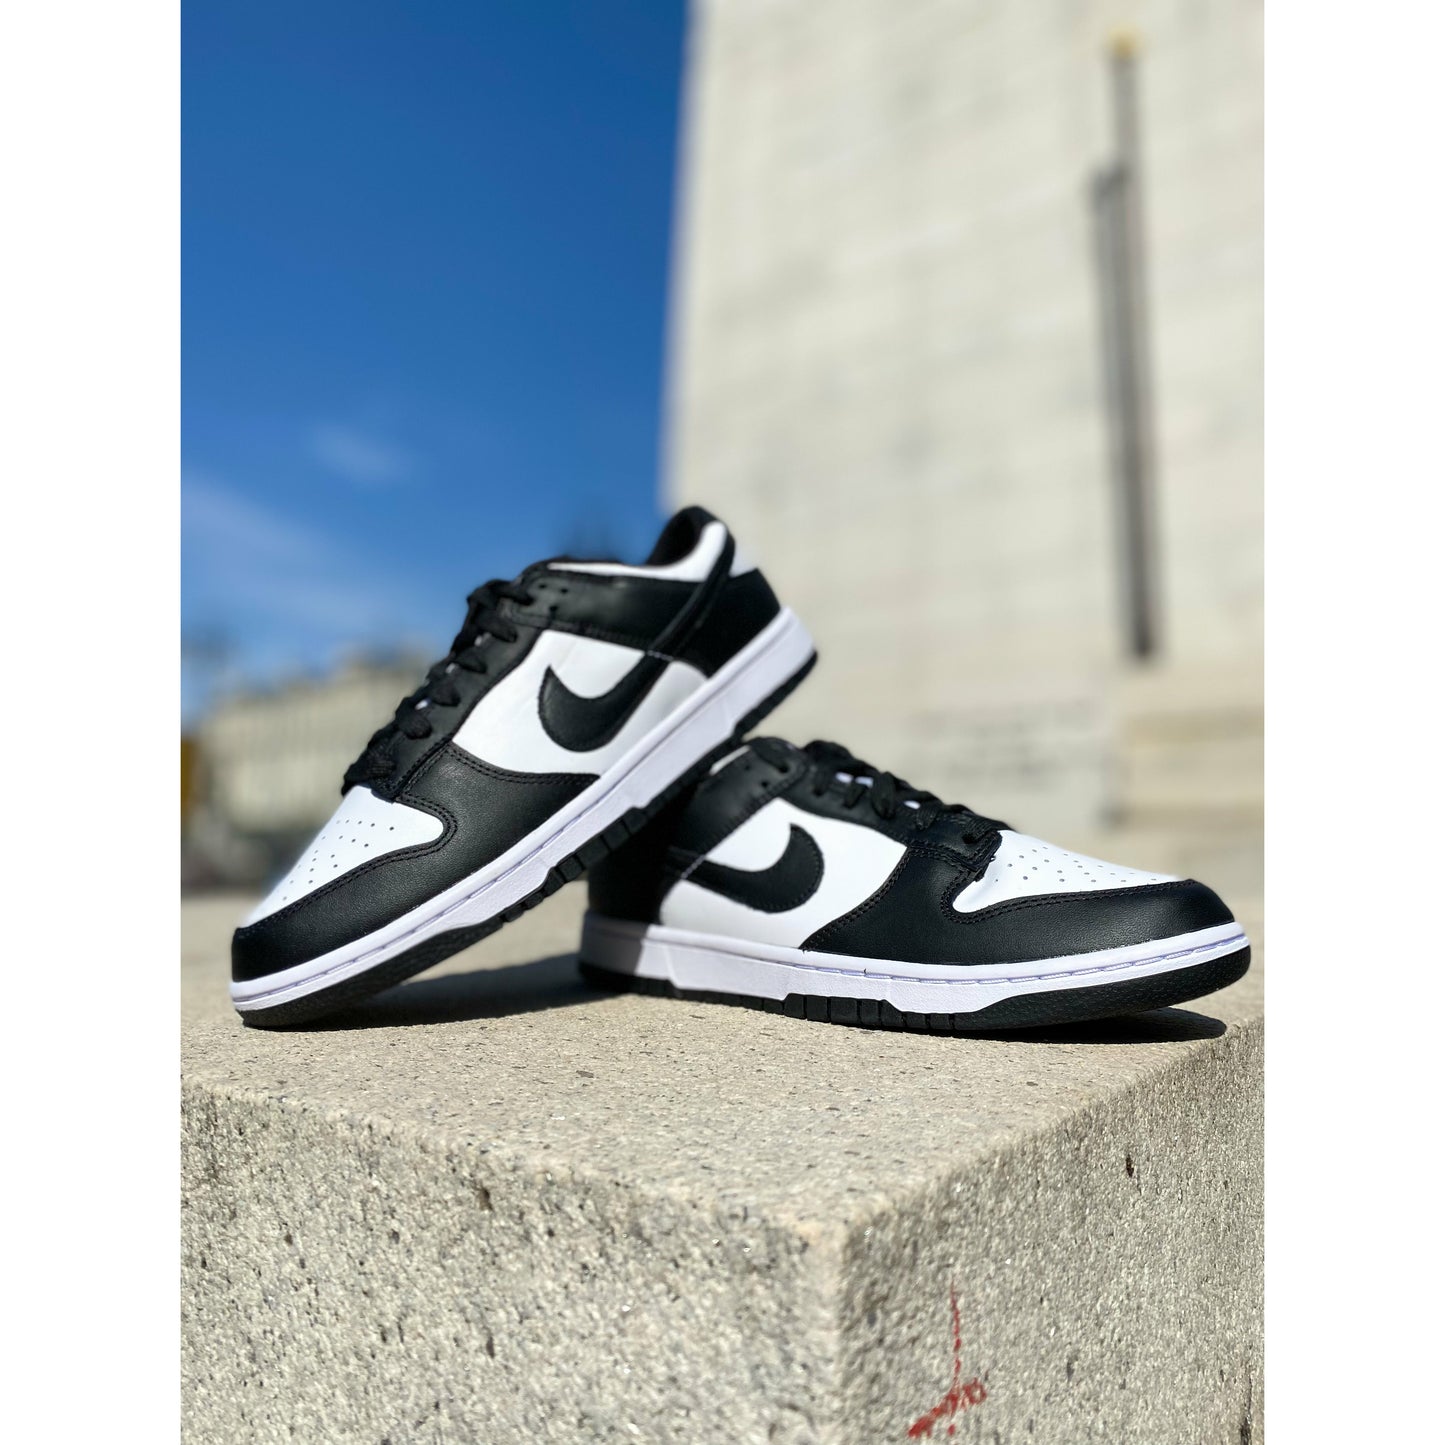 Nike Dunk Low Retro White Black (2021) by Nike from £102.00